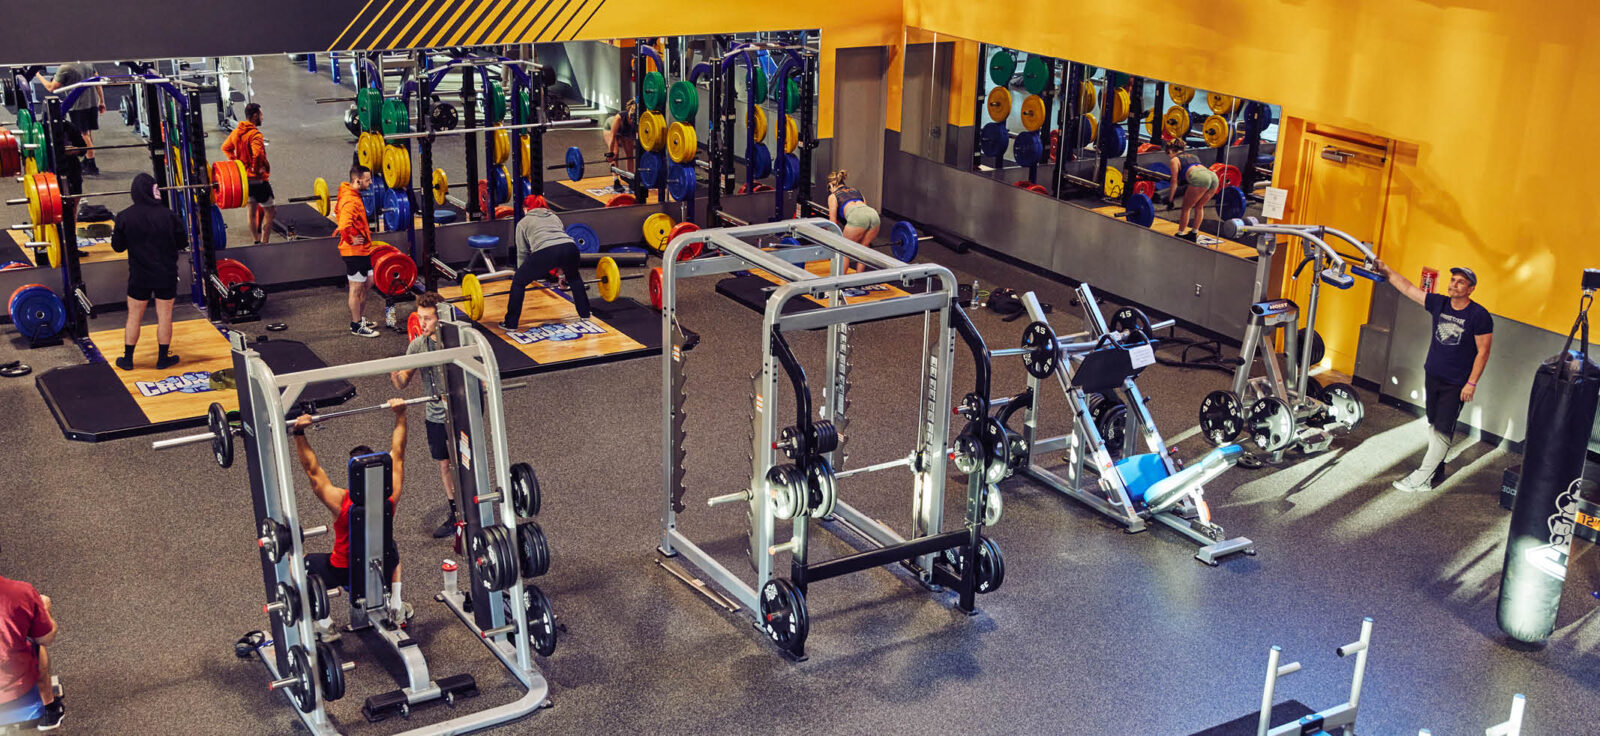 How Much is a Gym Membership: What to Expect from Every Price